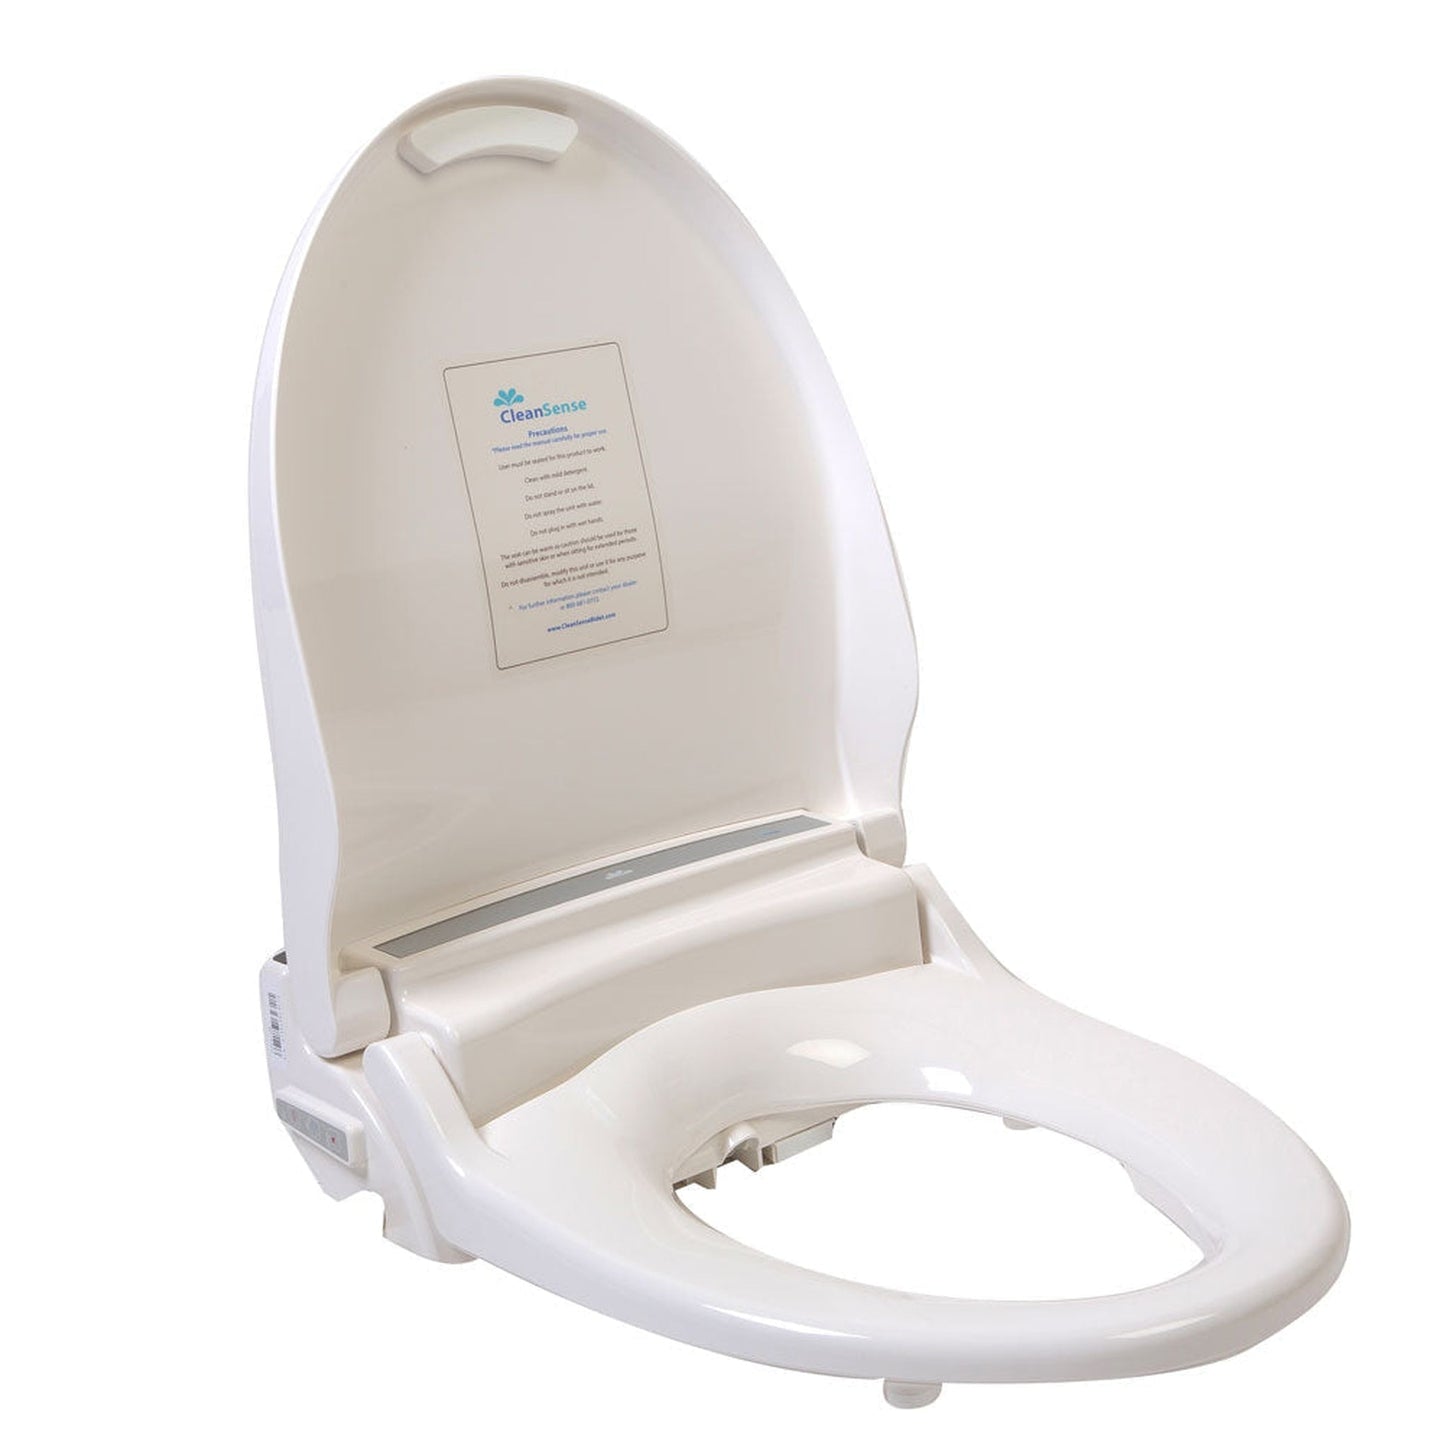 CleanSense DIB-1500R-RW White Advanced Round Bidet Seat With LCD Remote Control and Energy Efficient Water Heating System